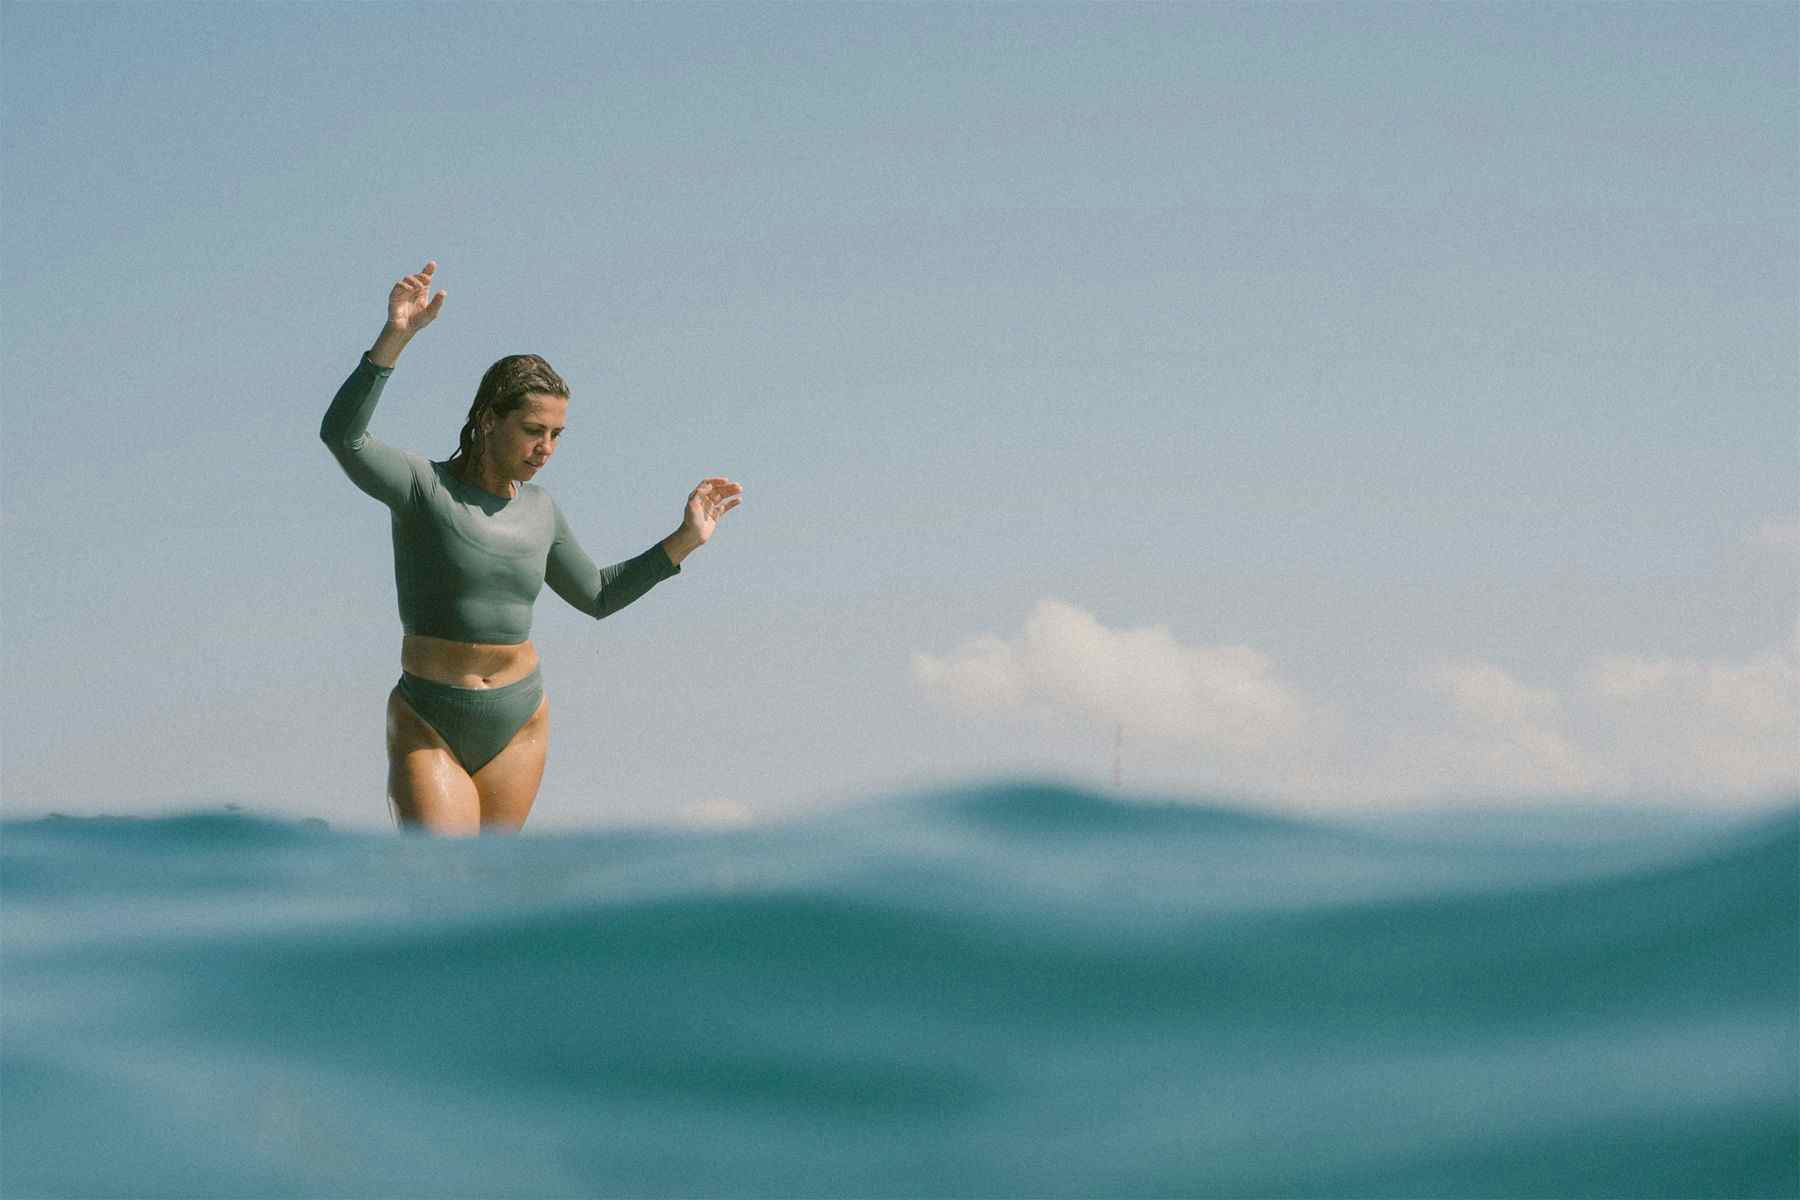 entrepreneur emma bukowski surfing a longboard as seen from behind the wave